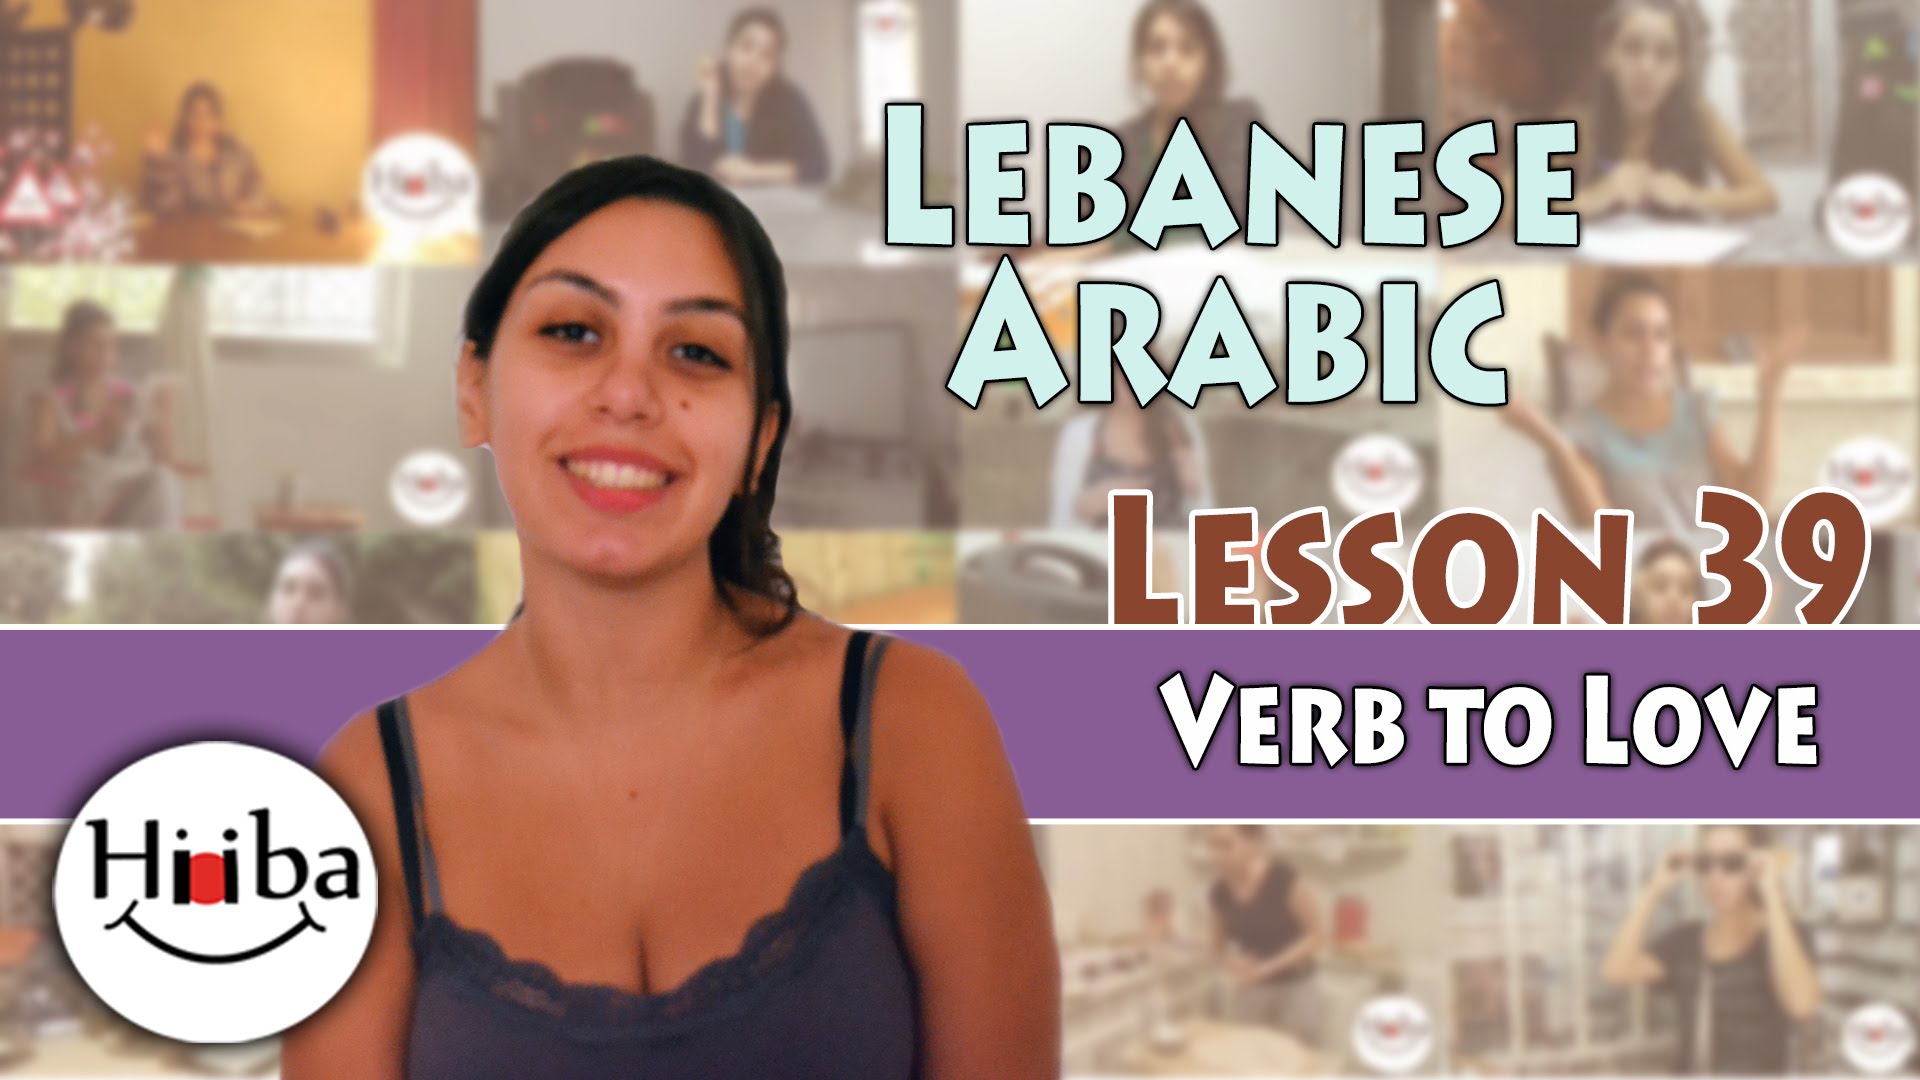 Thumbnail of video. It shows Hiba Najem with the title: Lesson 39 (Verb to Love)